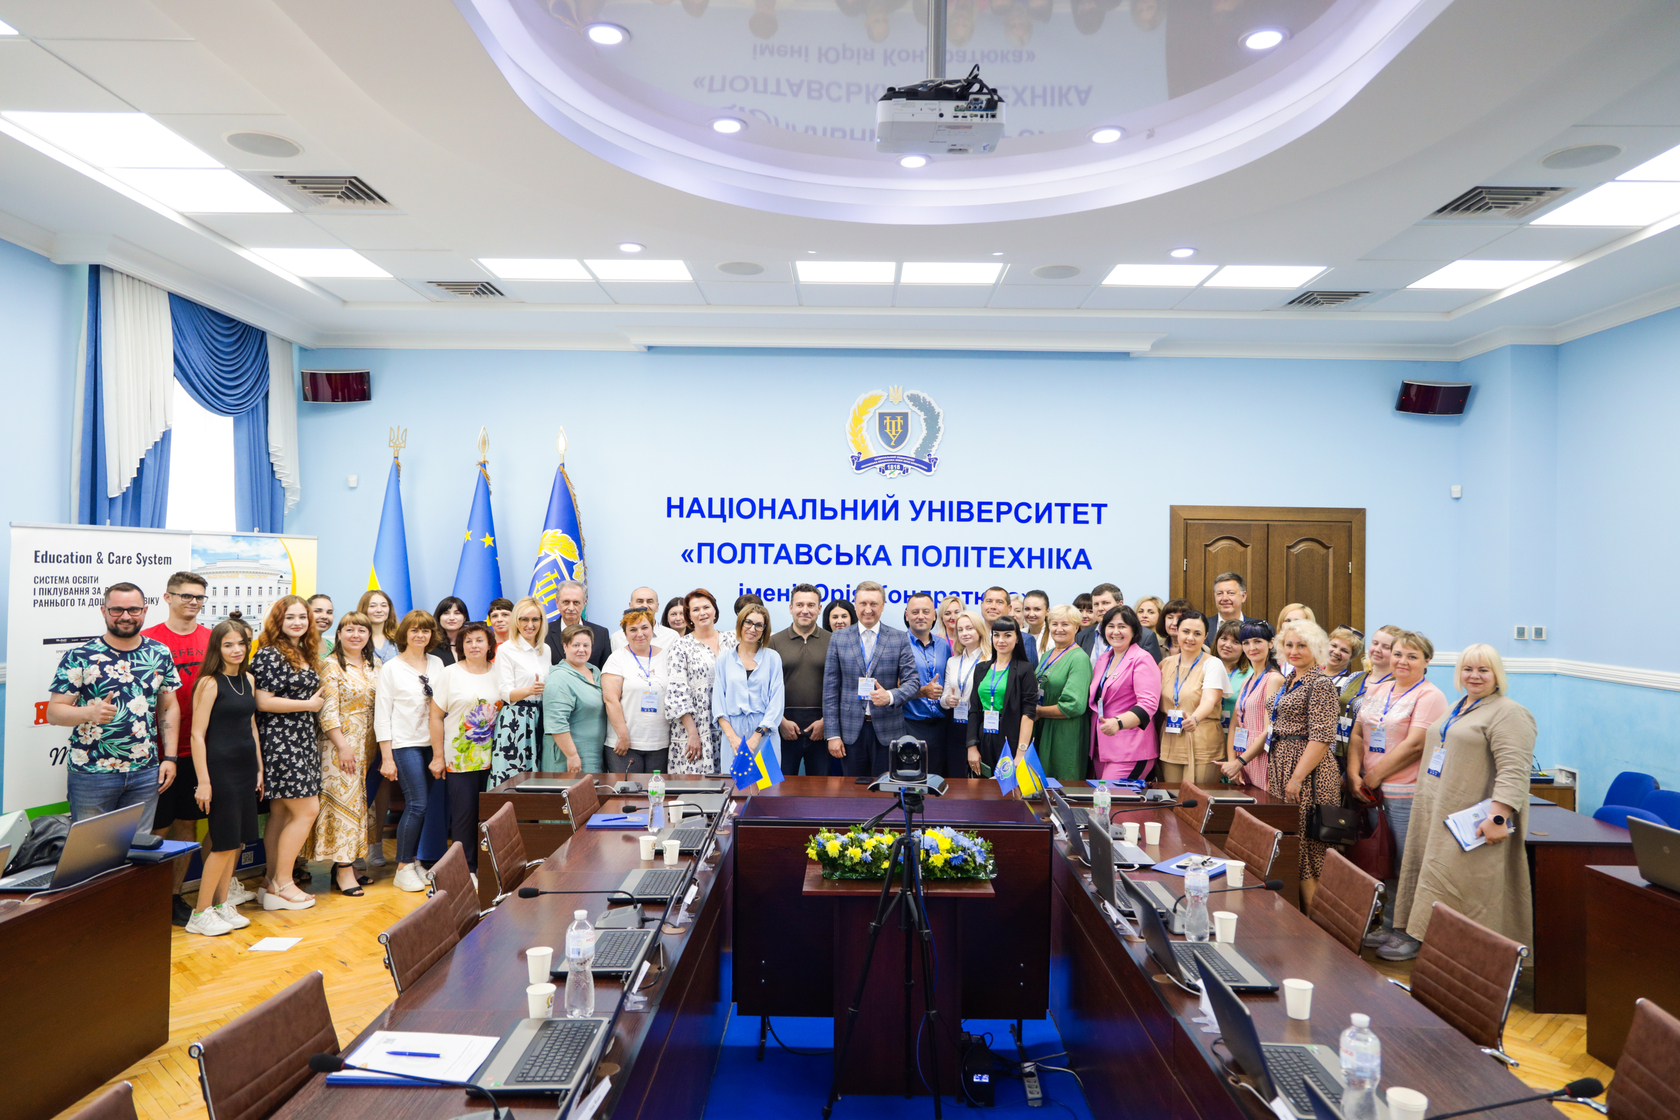 A workshop on the continuity of education from kindergarten to higher education is held at Poltava Polytechnic